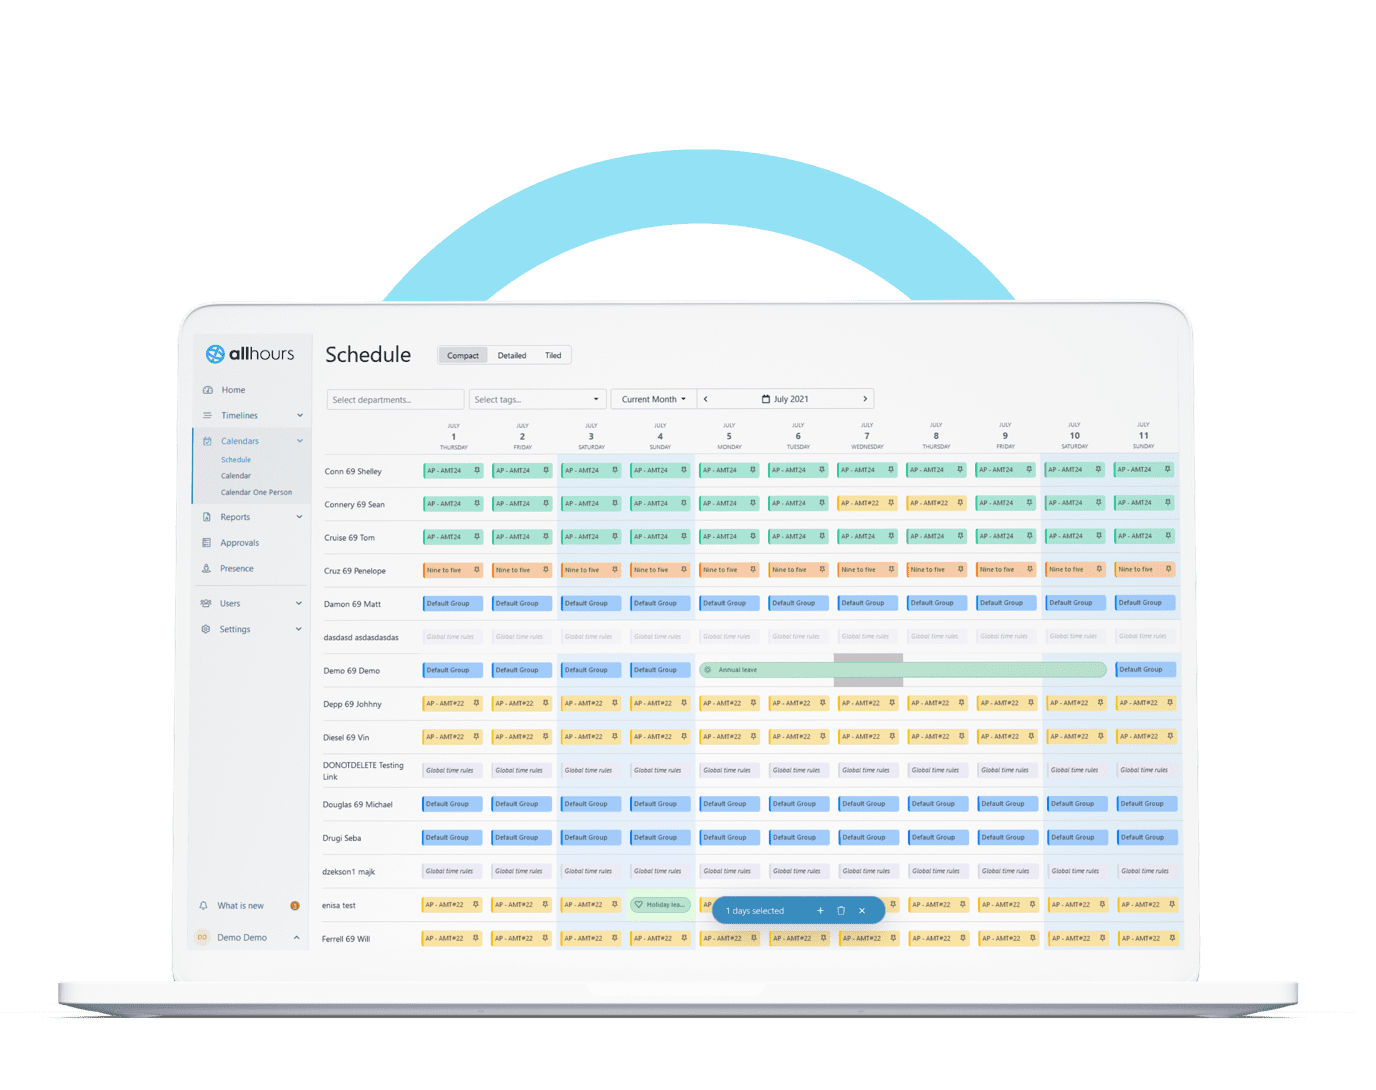 Calendar view for better planning and decisions regarding overtime